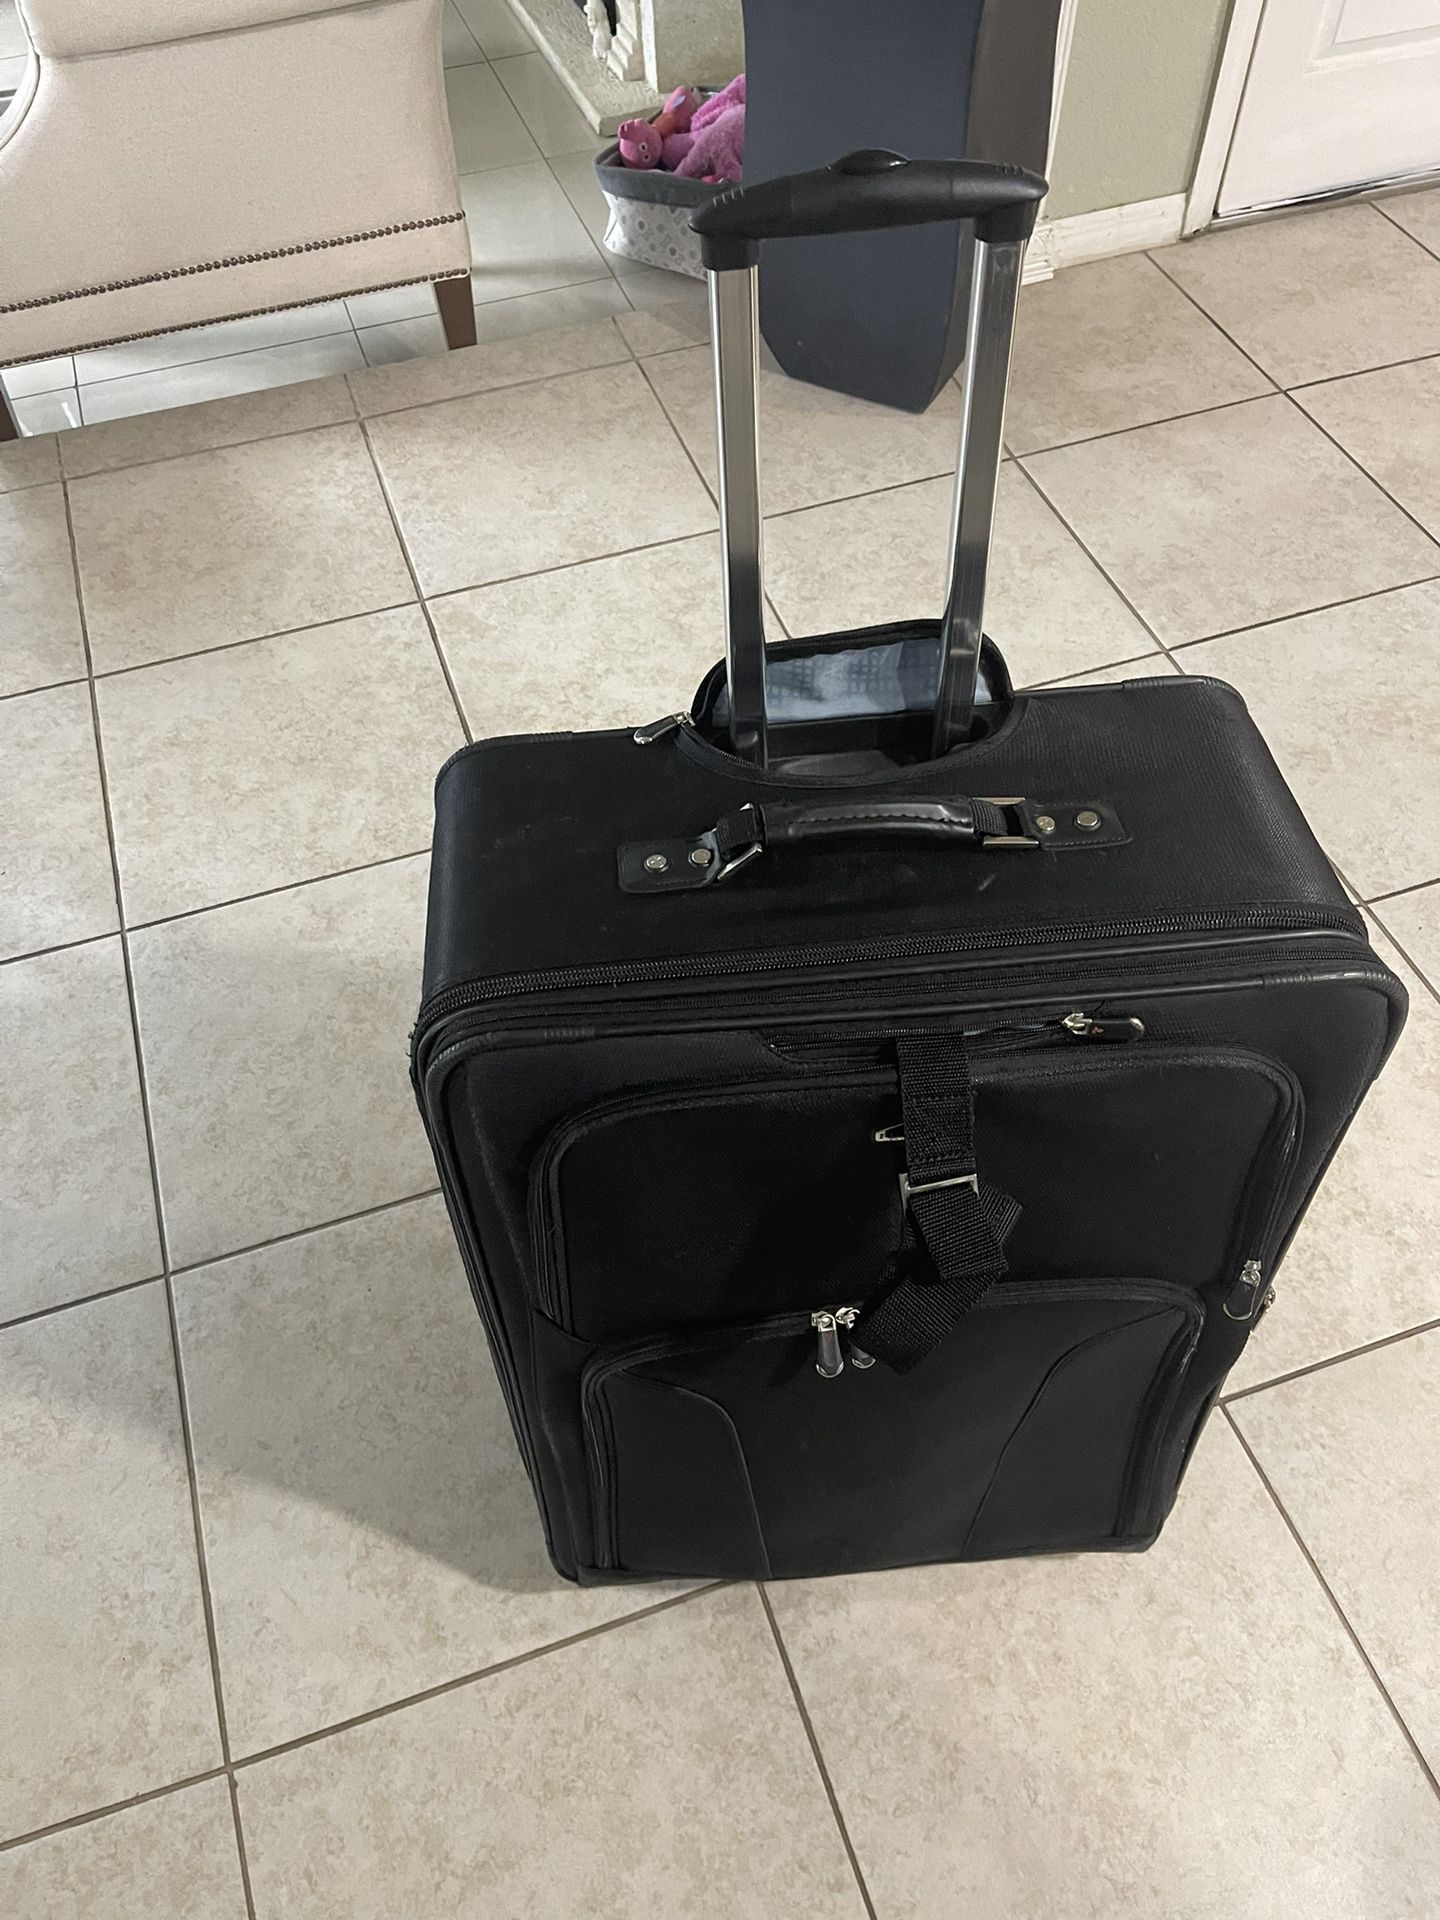 Brand New Black Suitcase for Sale in St. Petersburg, FL - OfferUp